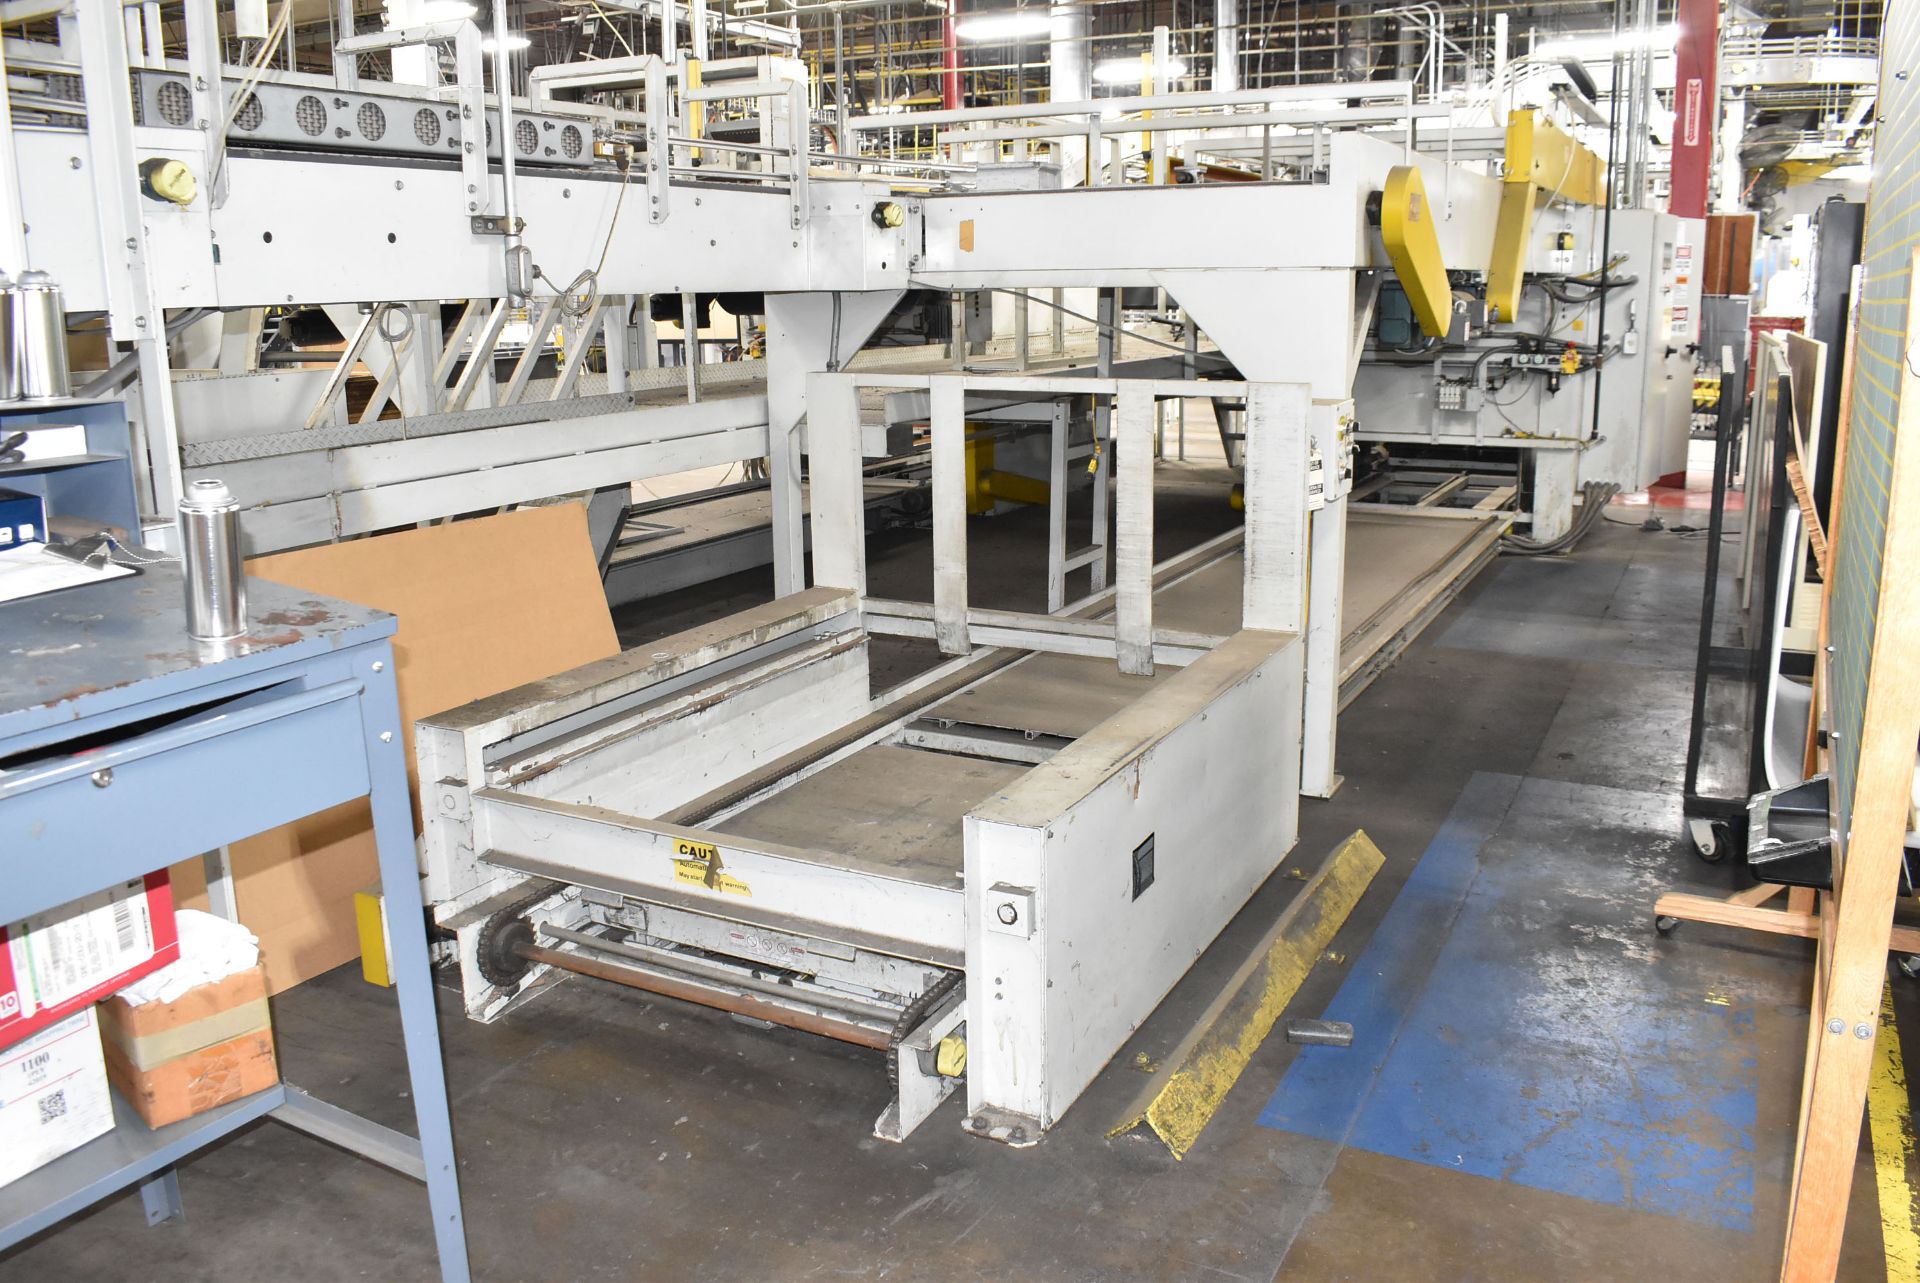 SARDEE INDUSTRIES 4000 DEPALLETIZER WITH ALLEN BRADLEY PANEL VIEW 600 TOUCH SCREEN CONTROL, BANNER - Image 23 of 40